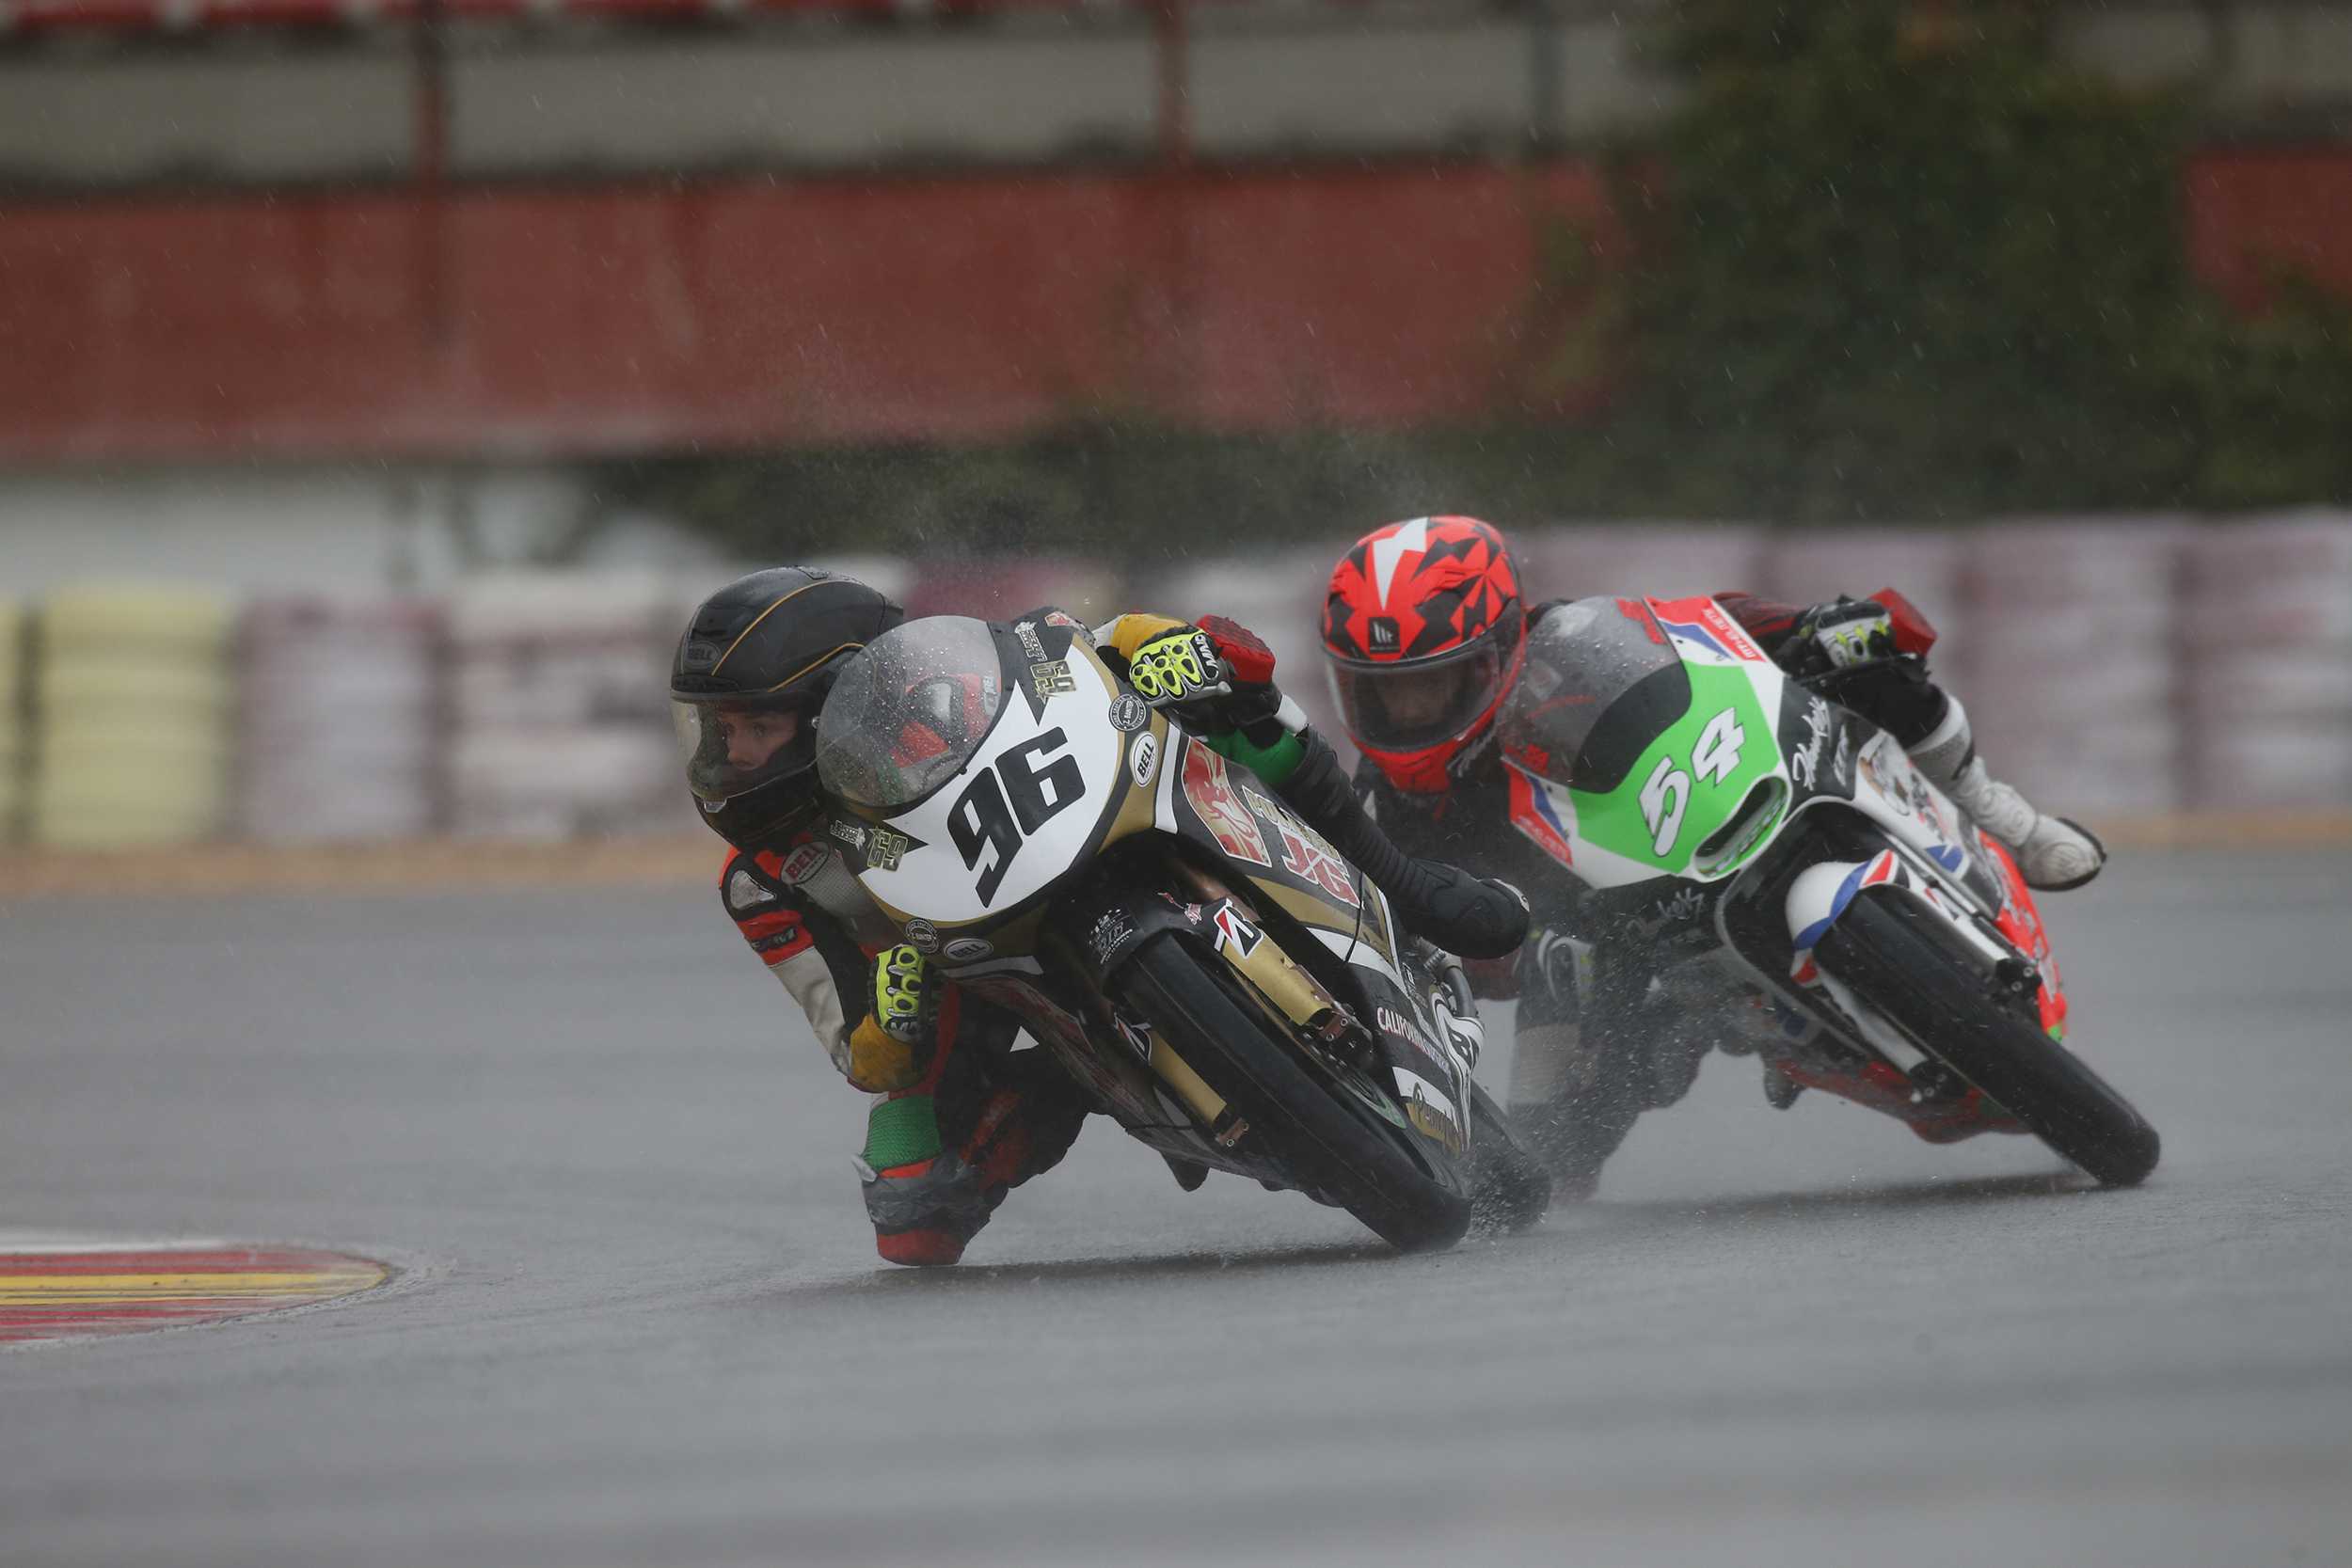 American Rocco Landers Looking Forward To Round Two Of CEV RFME 85cc Series Following Podium Finishes At Round One